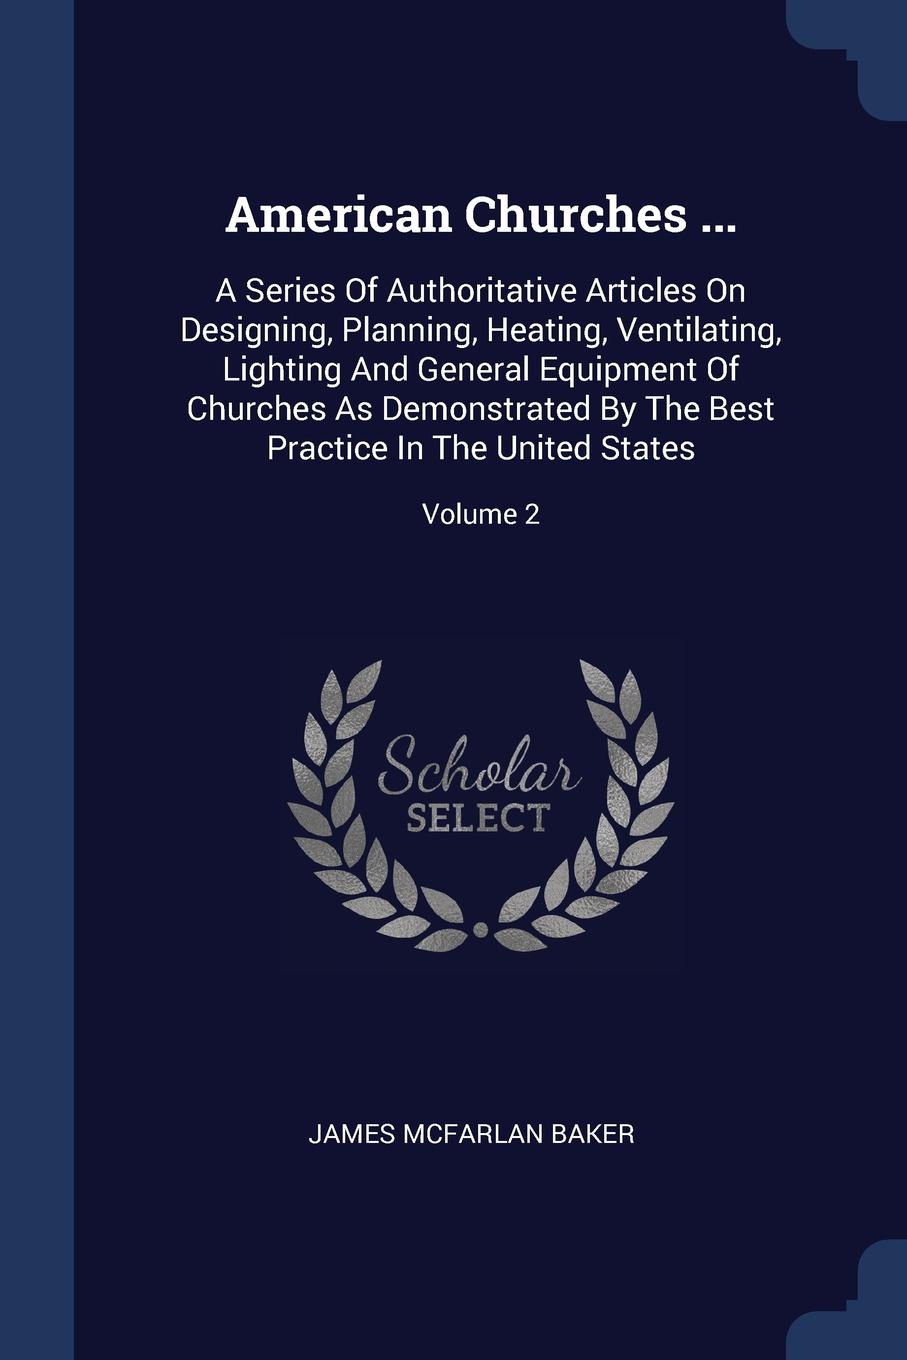 American Churches ... A Series Of Authoritative Articles On Designing, Planning, Heating, Ventilating, Lighting And General Equipment Of Churches As Demonstrated By The Best Practice In The United States; Volume 2